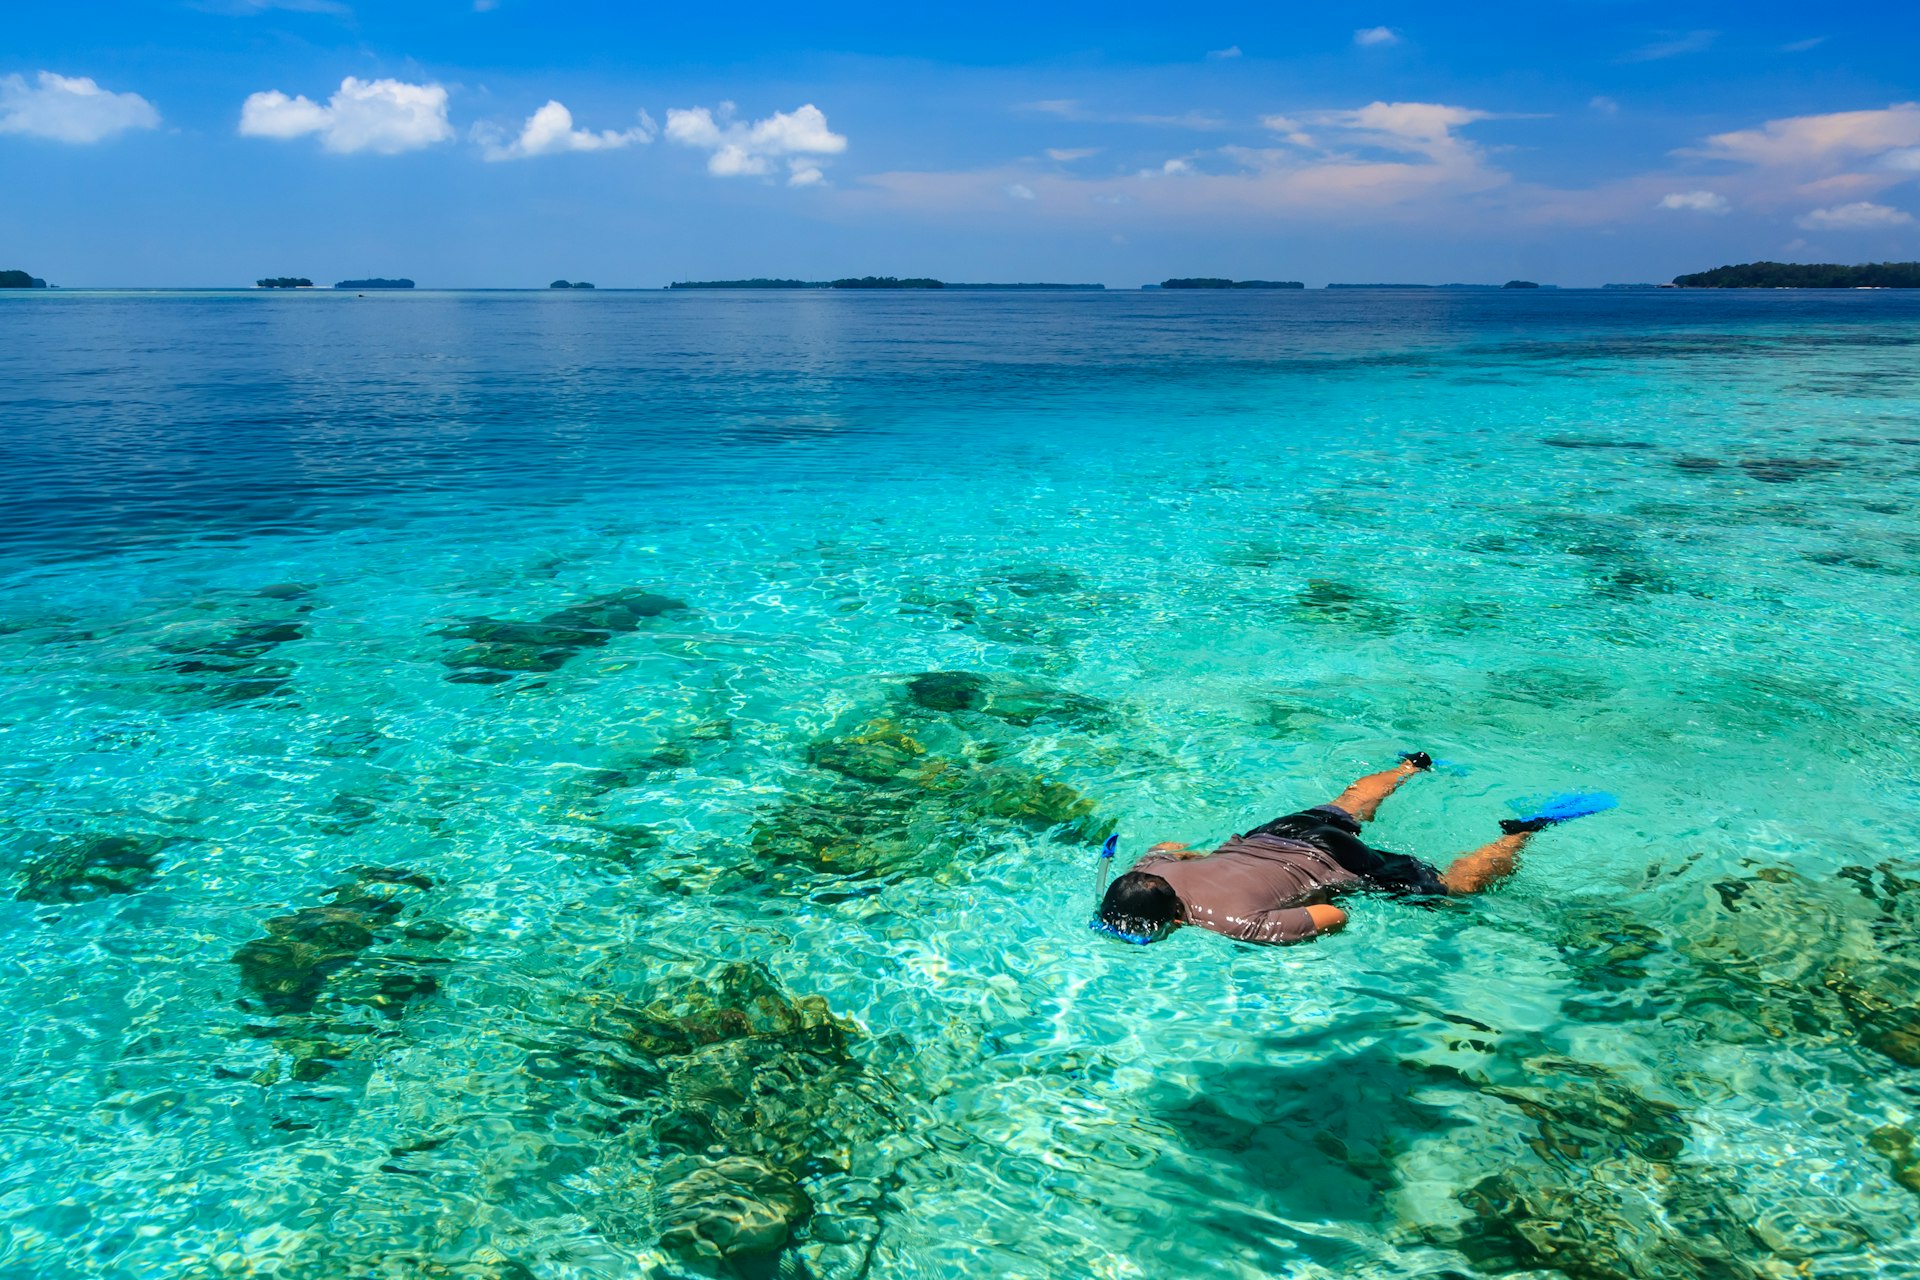 A snorkeler in the blue waters of the Thousand Islands near Jakarta